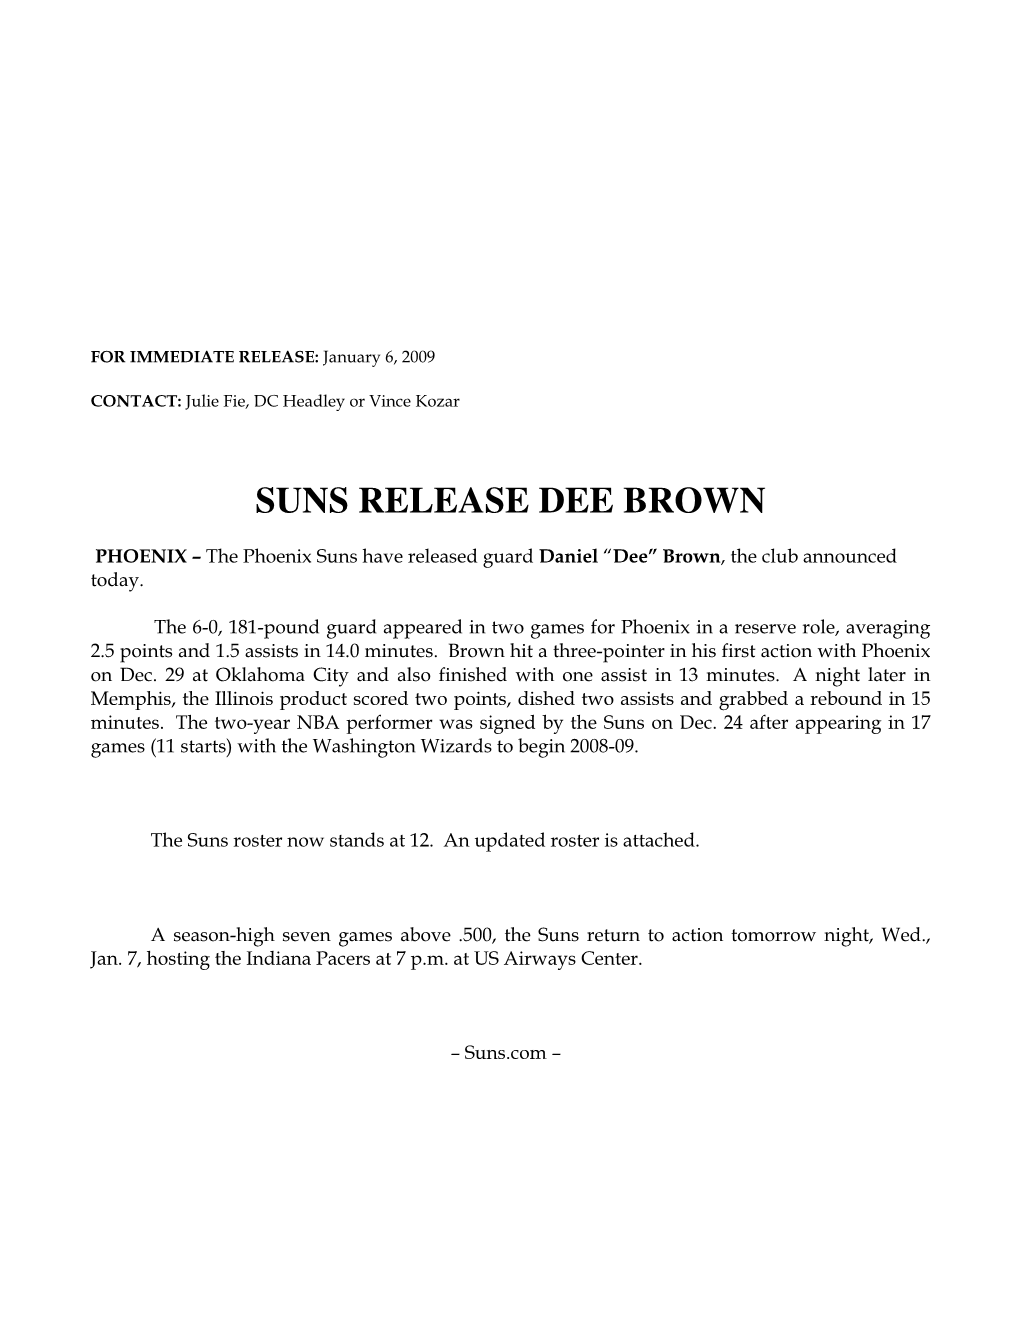 Suns Release Dee Brown